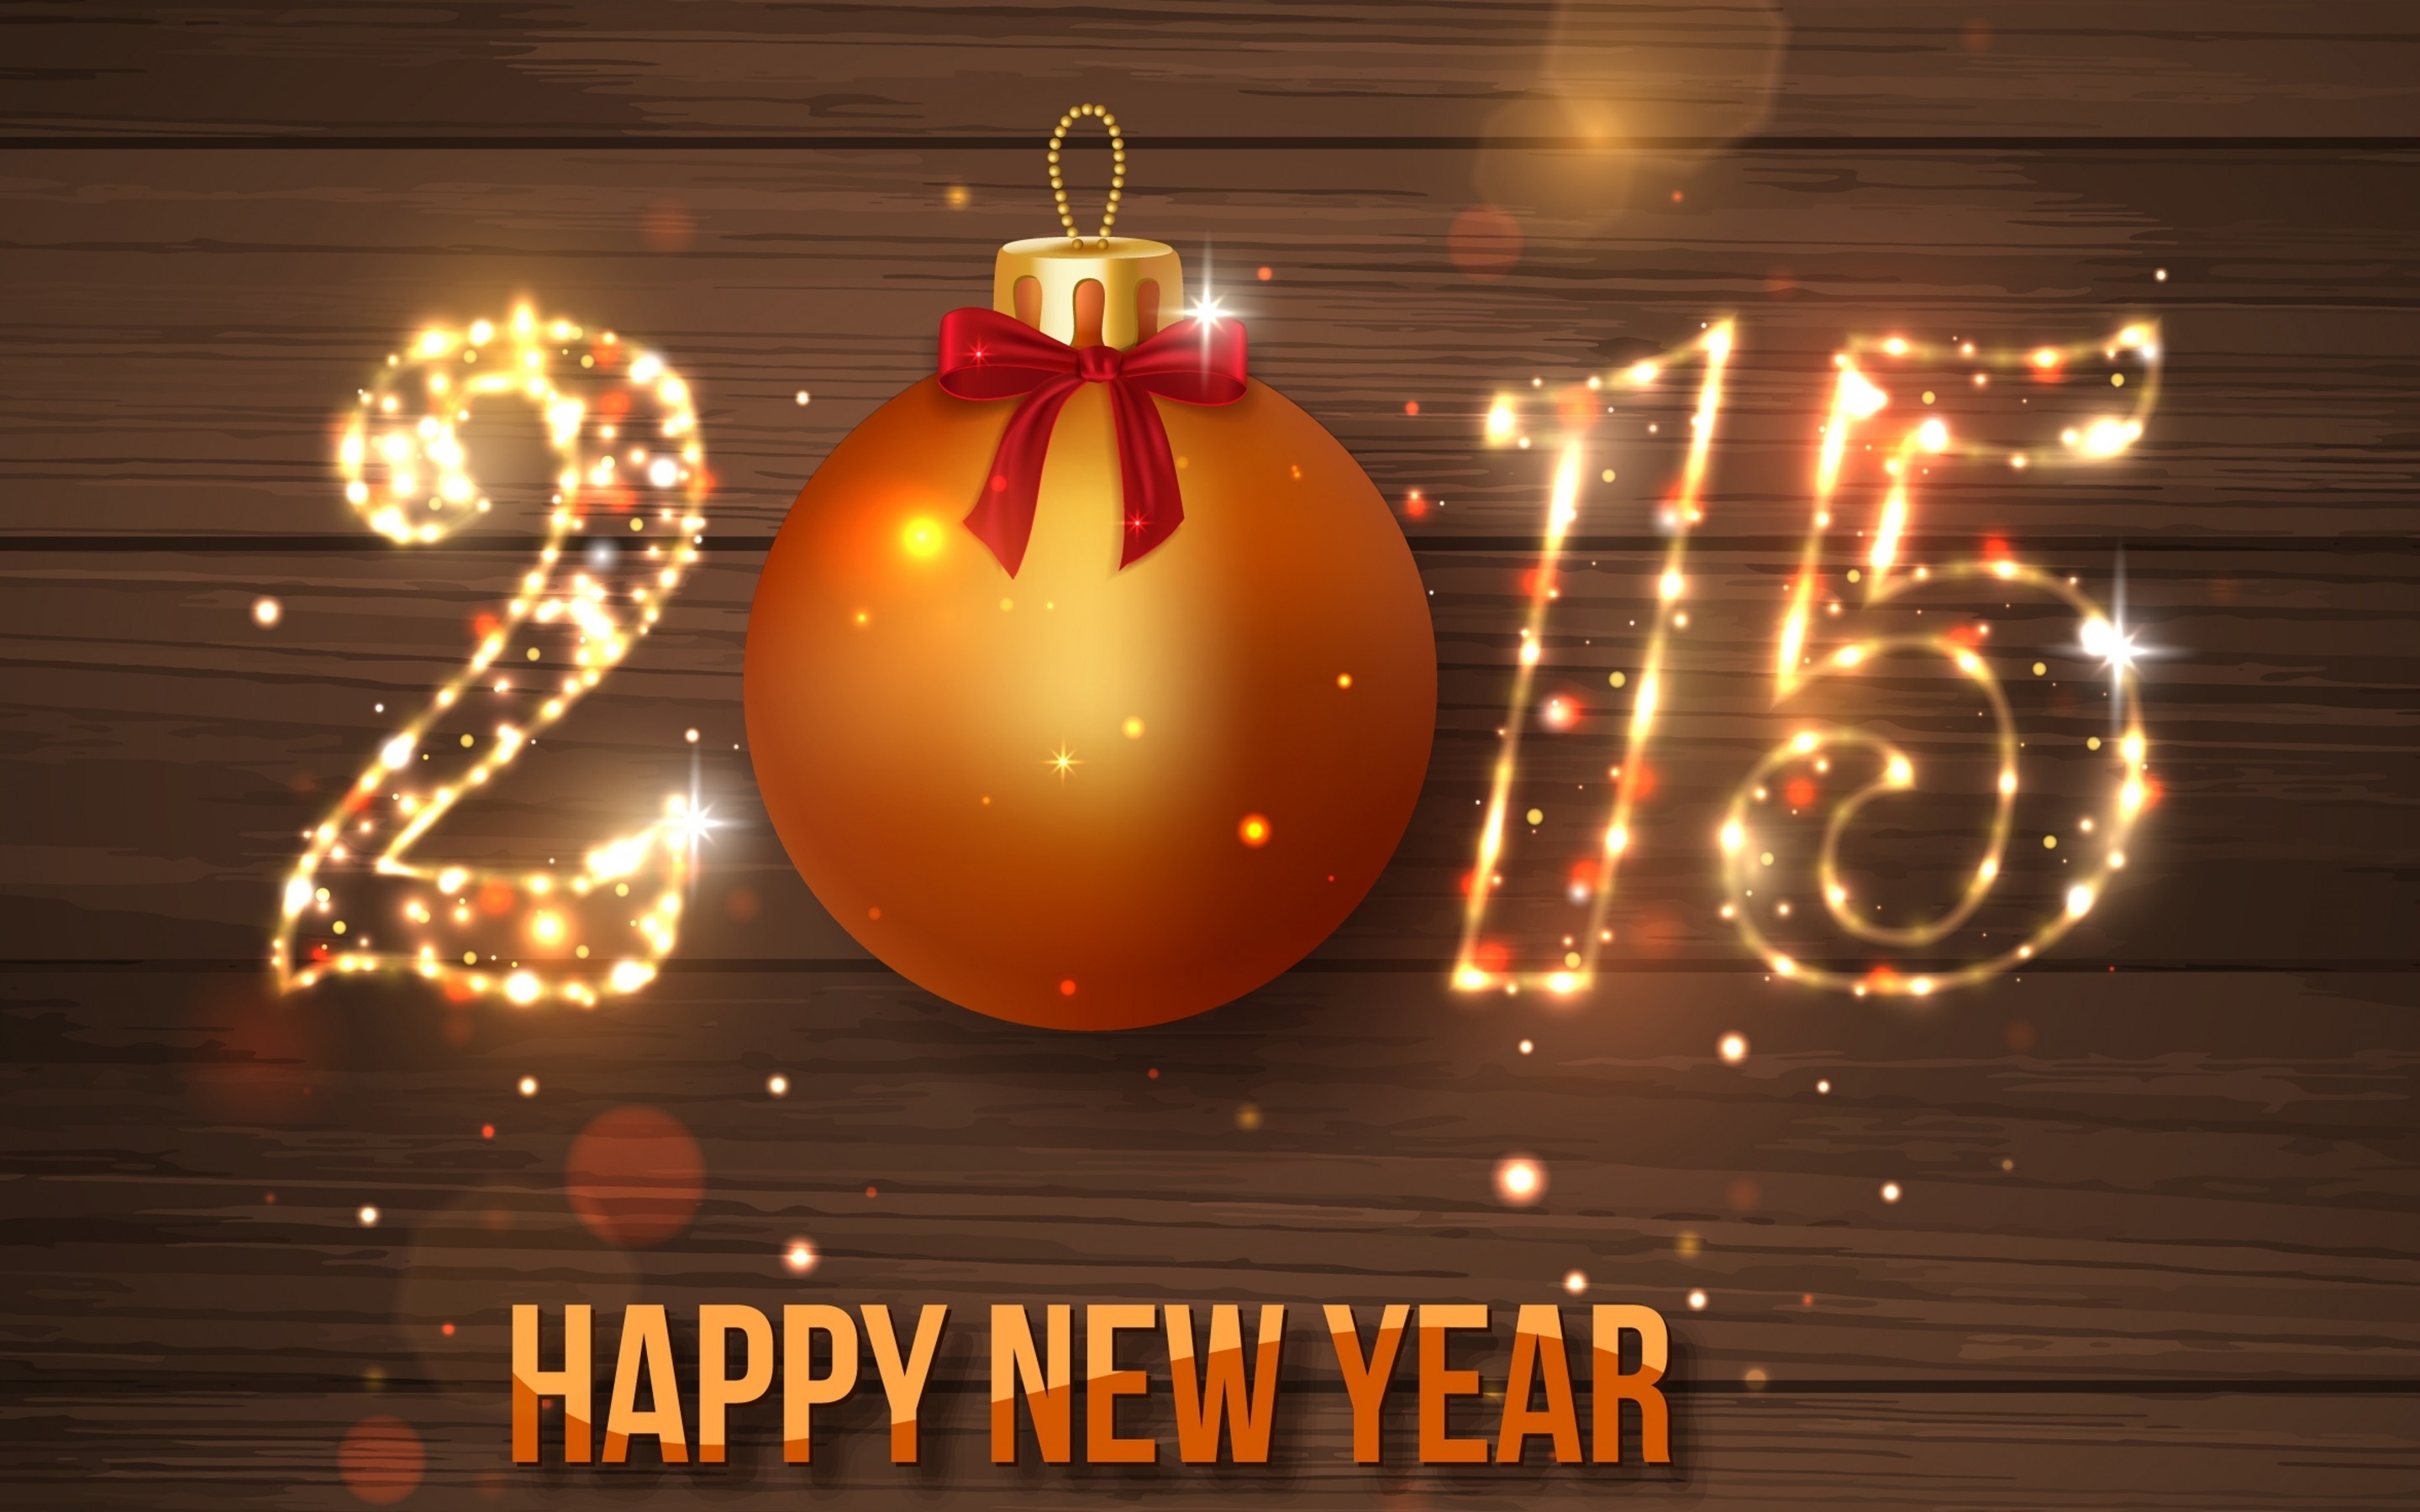 2015 Happy New Year for 2880 x 1800 Retina Display resolution